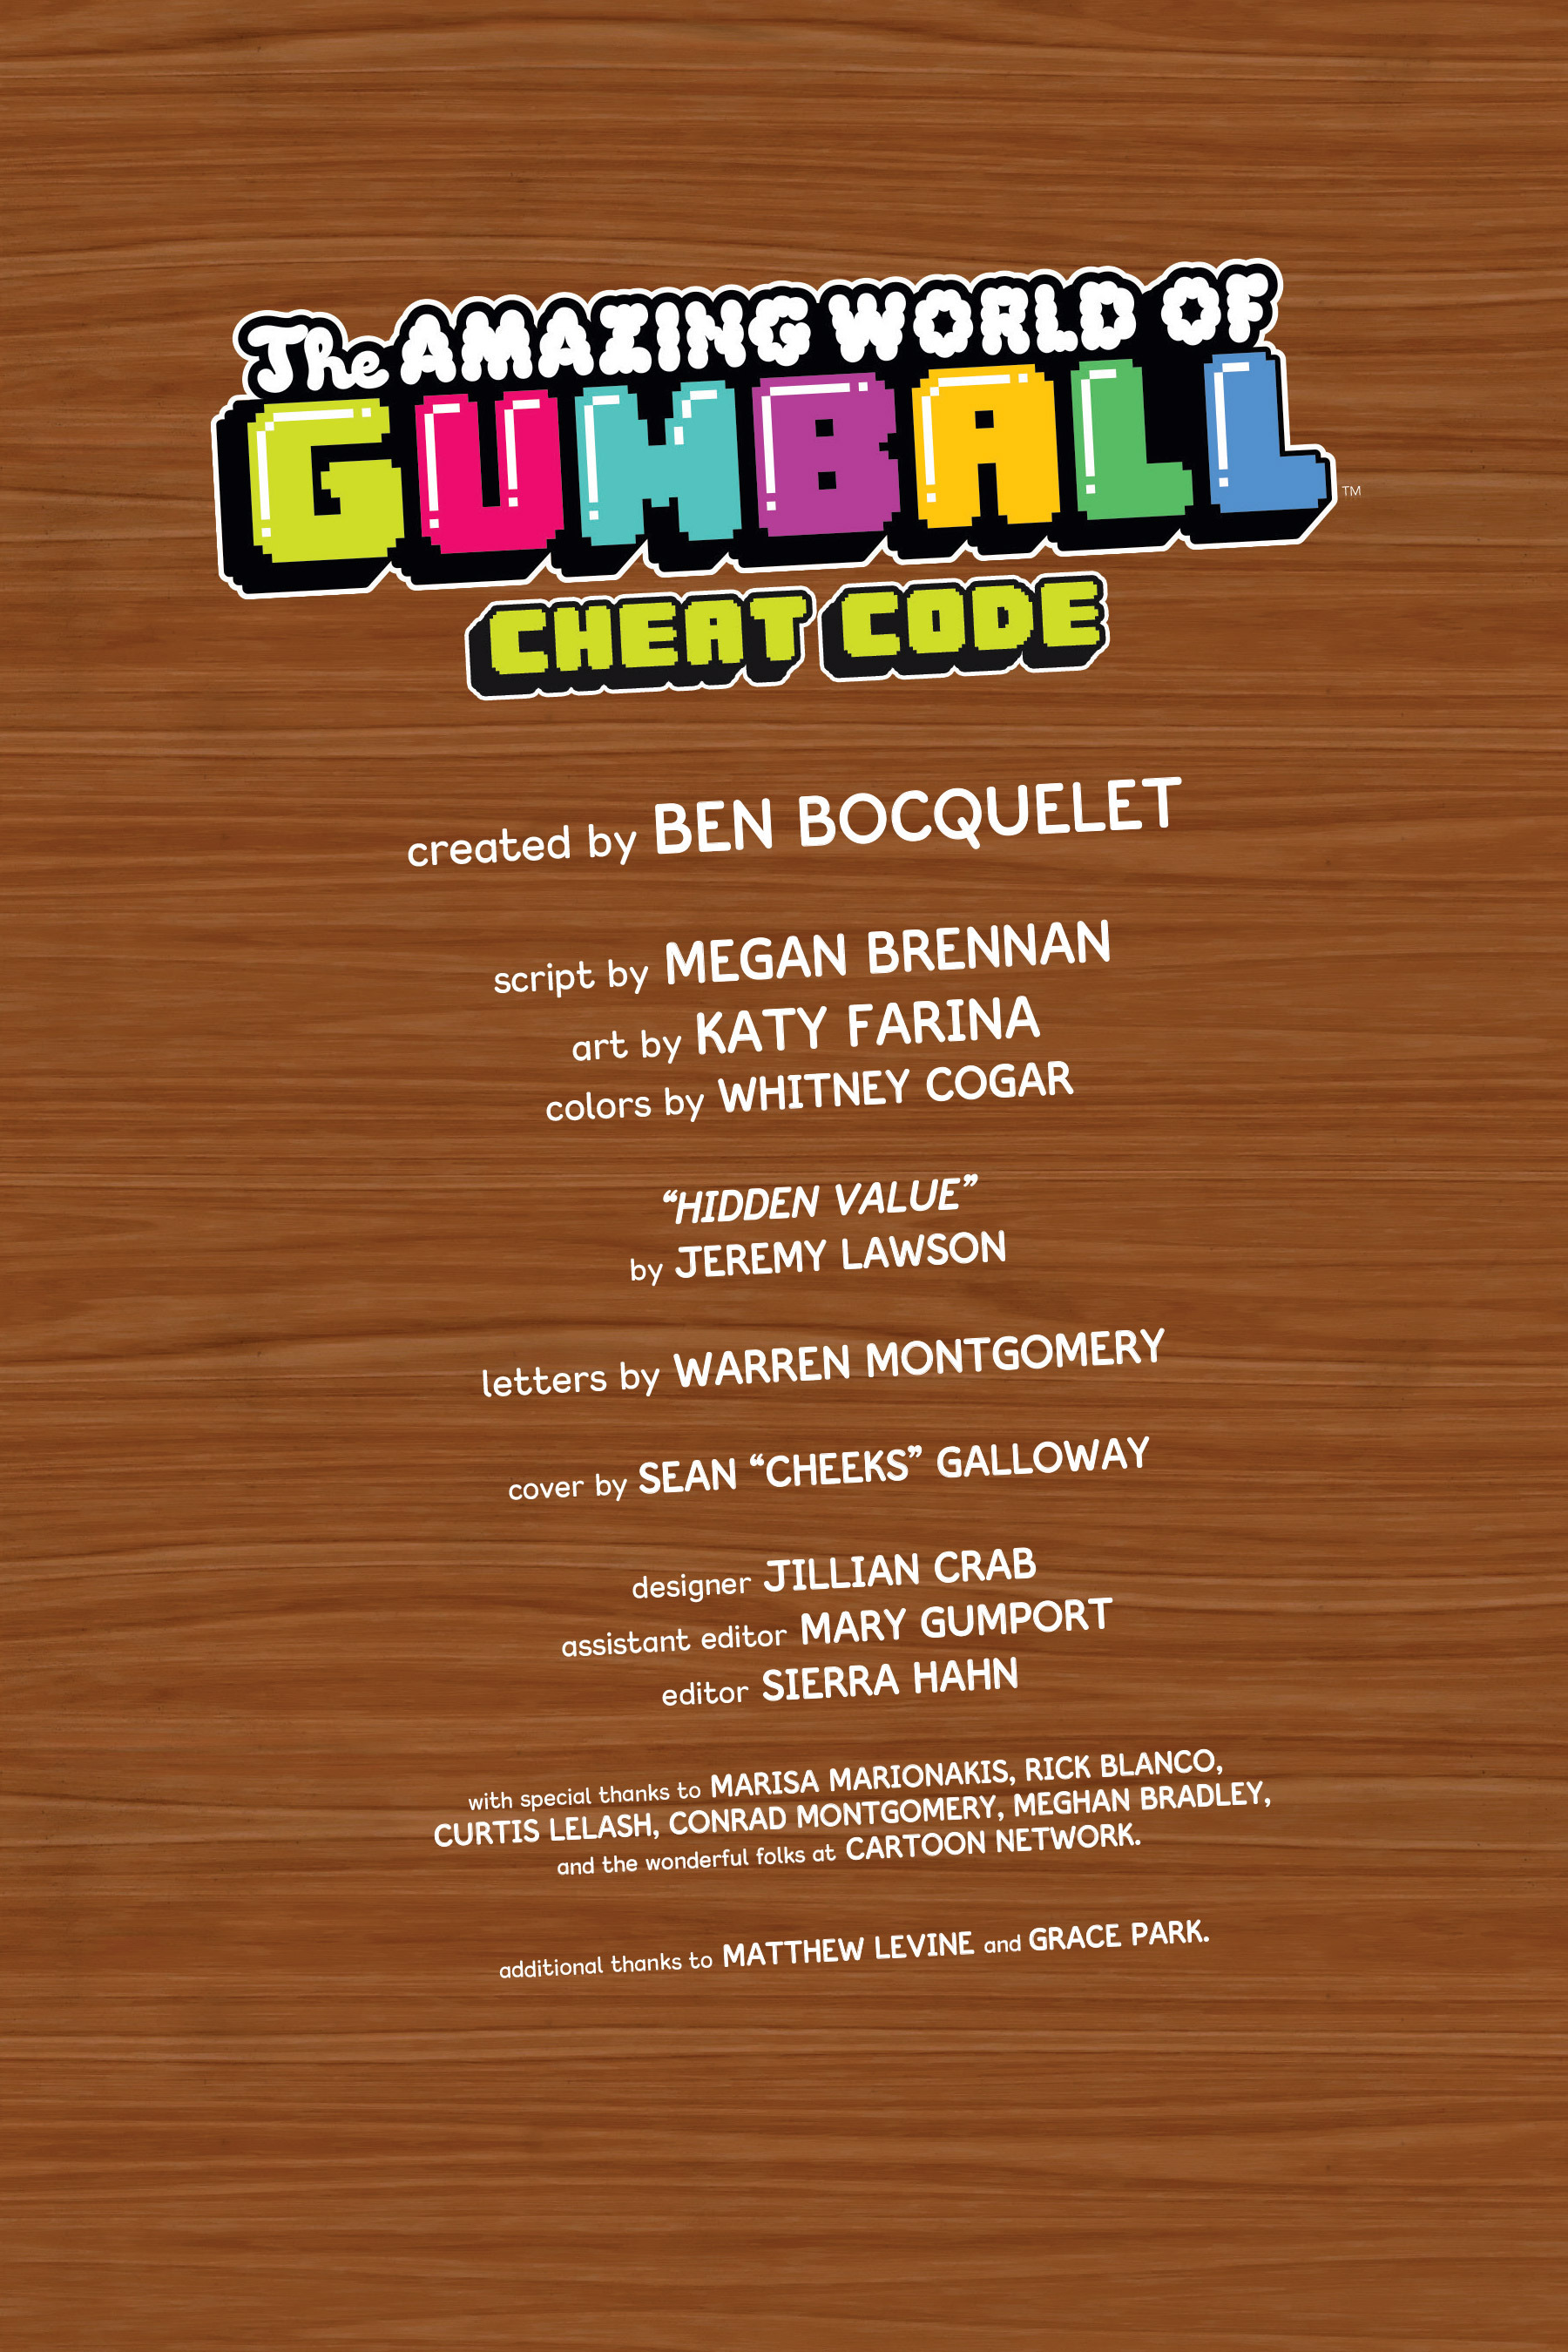 Read online The Amazing World of Gumball: Cheat Code comic -  Issue # Full - 4